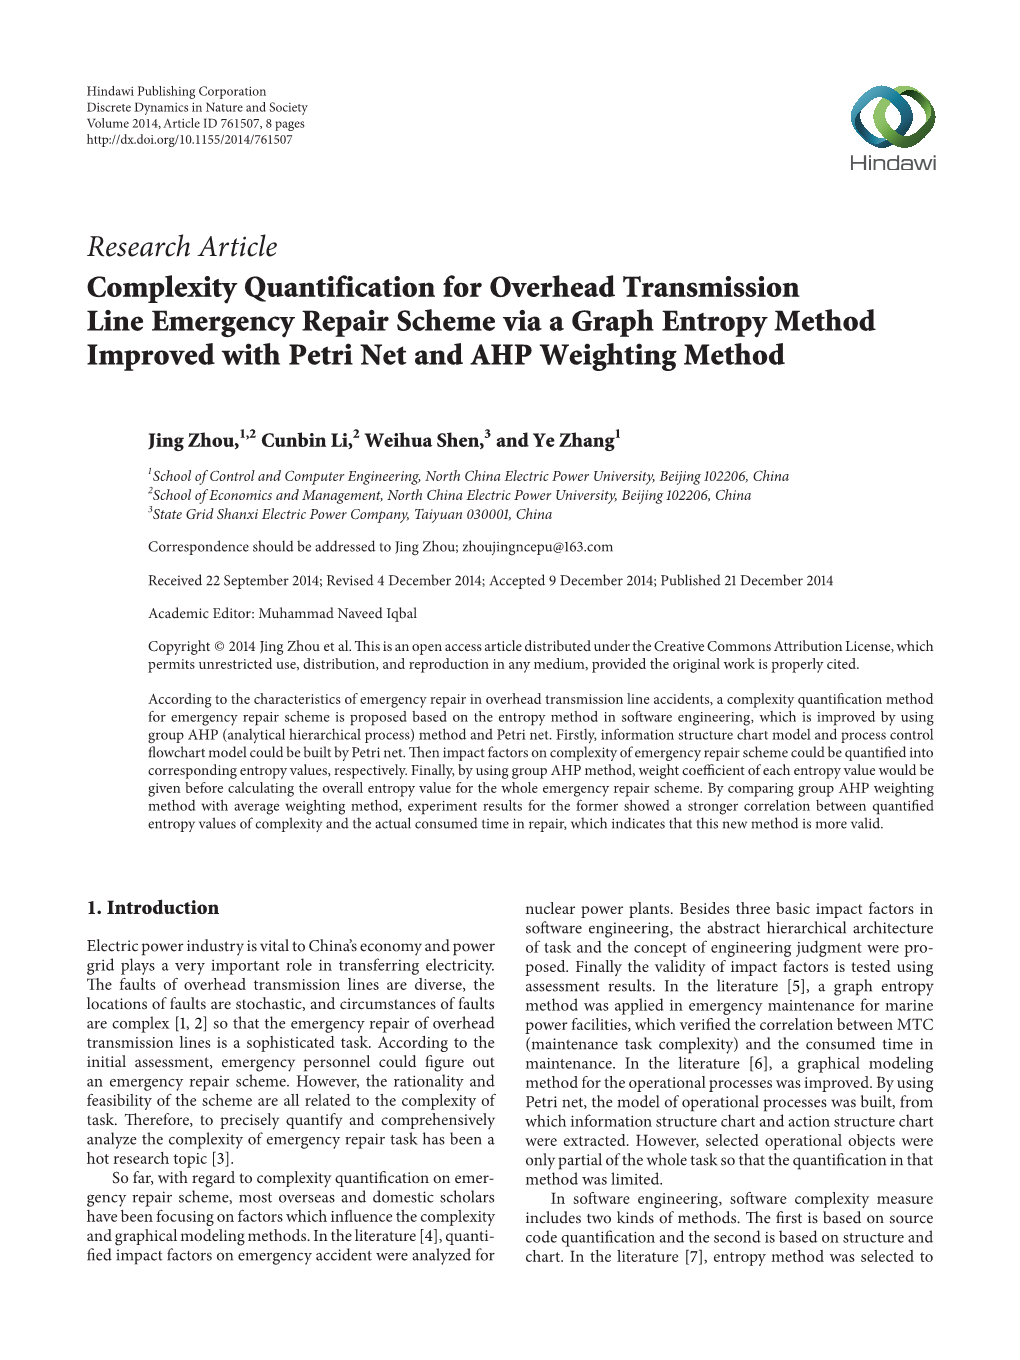 Complexity Quantification for Overhead Transmission Line Emergency Repair Scheme Via a Graph Entropy Method Improved with Petri Net and AHP Weighting Method